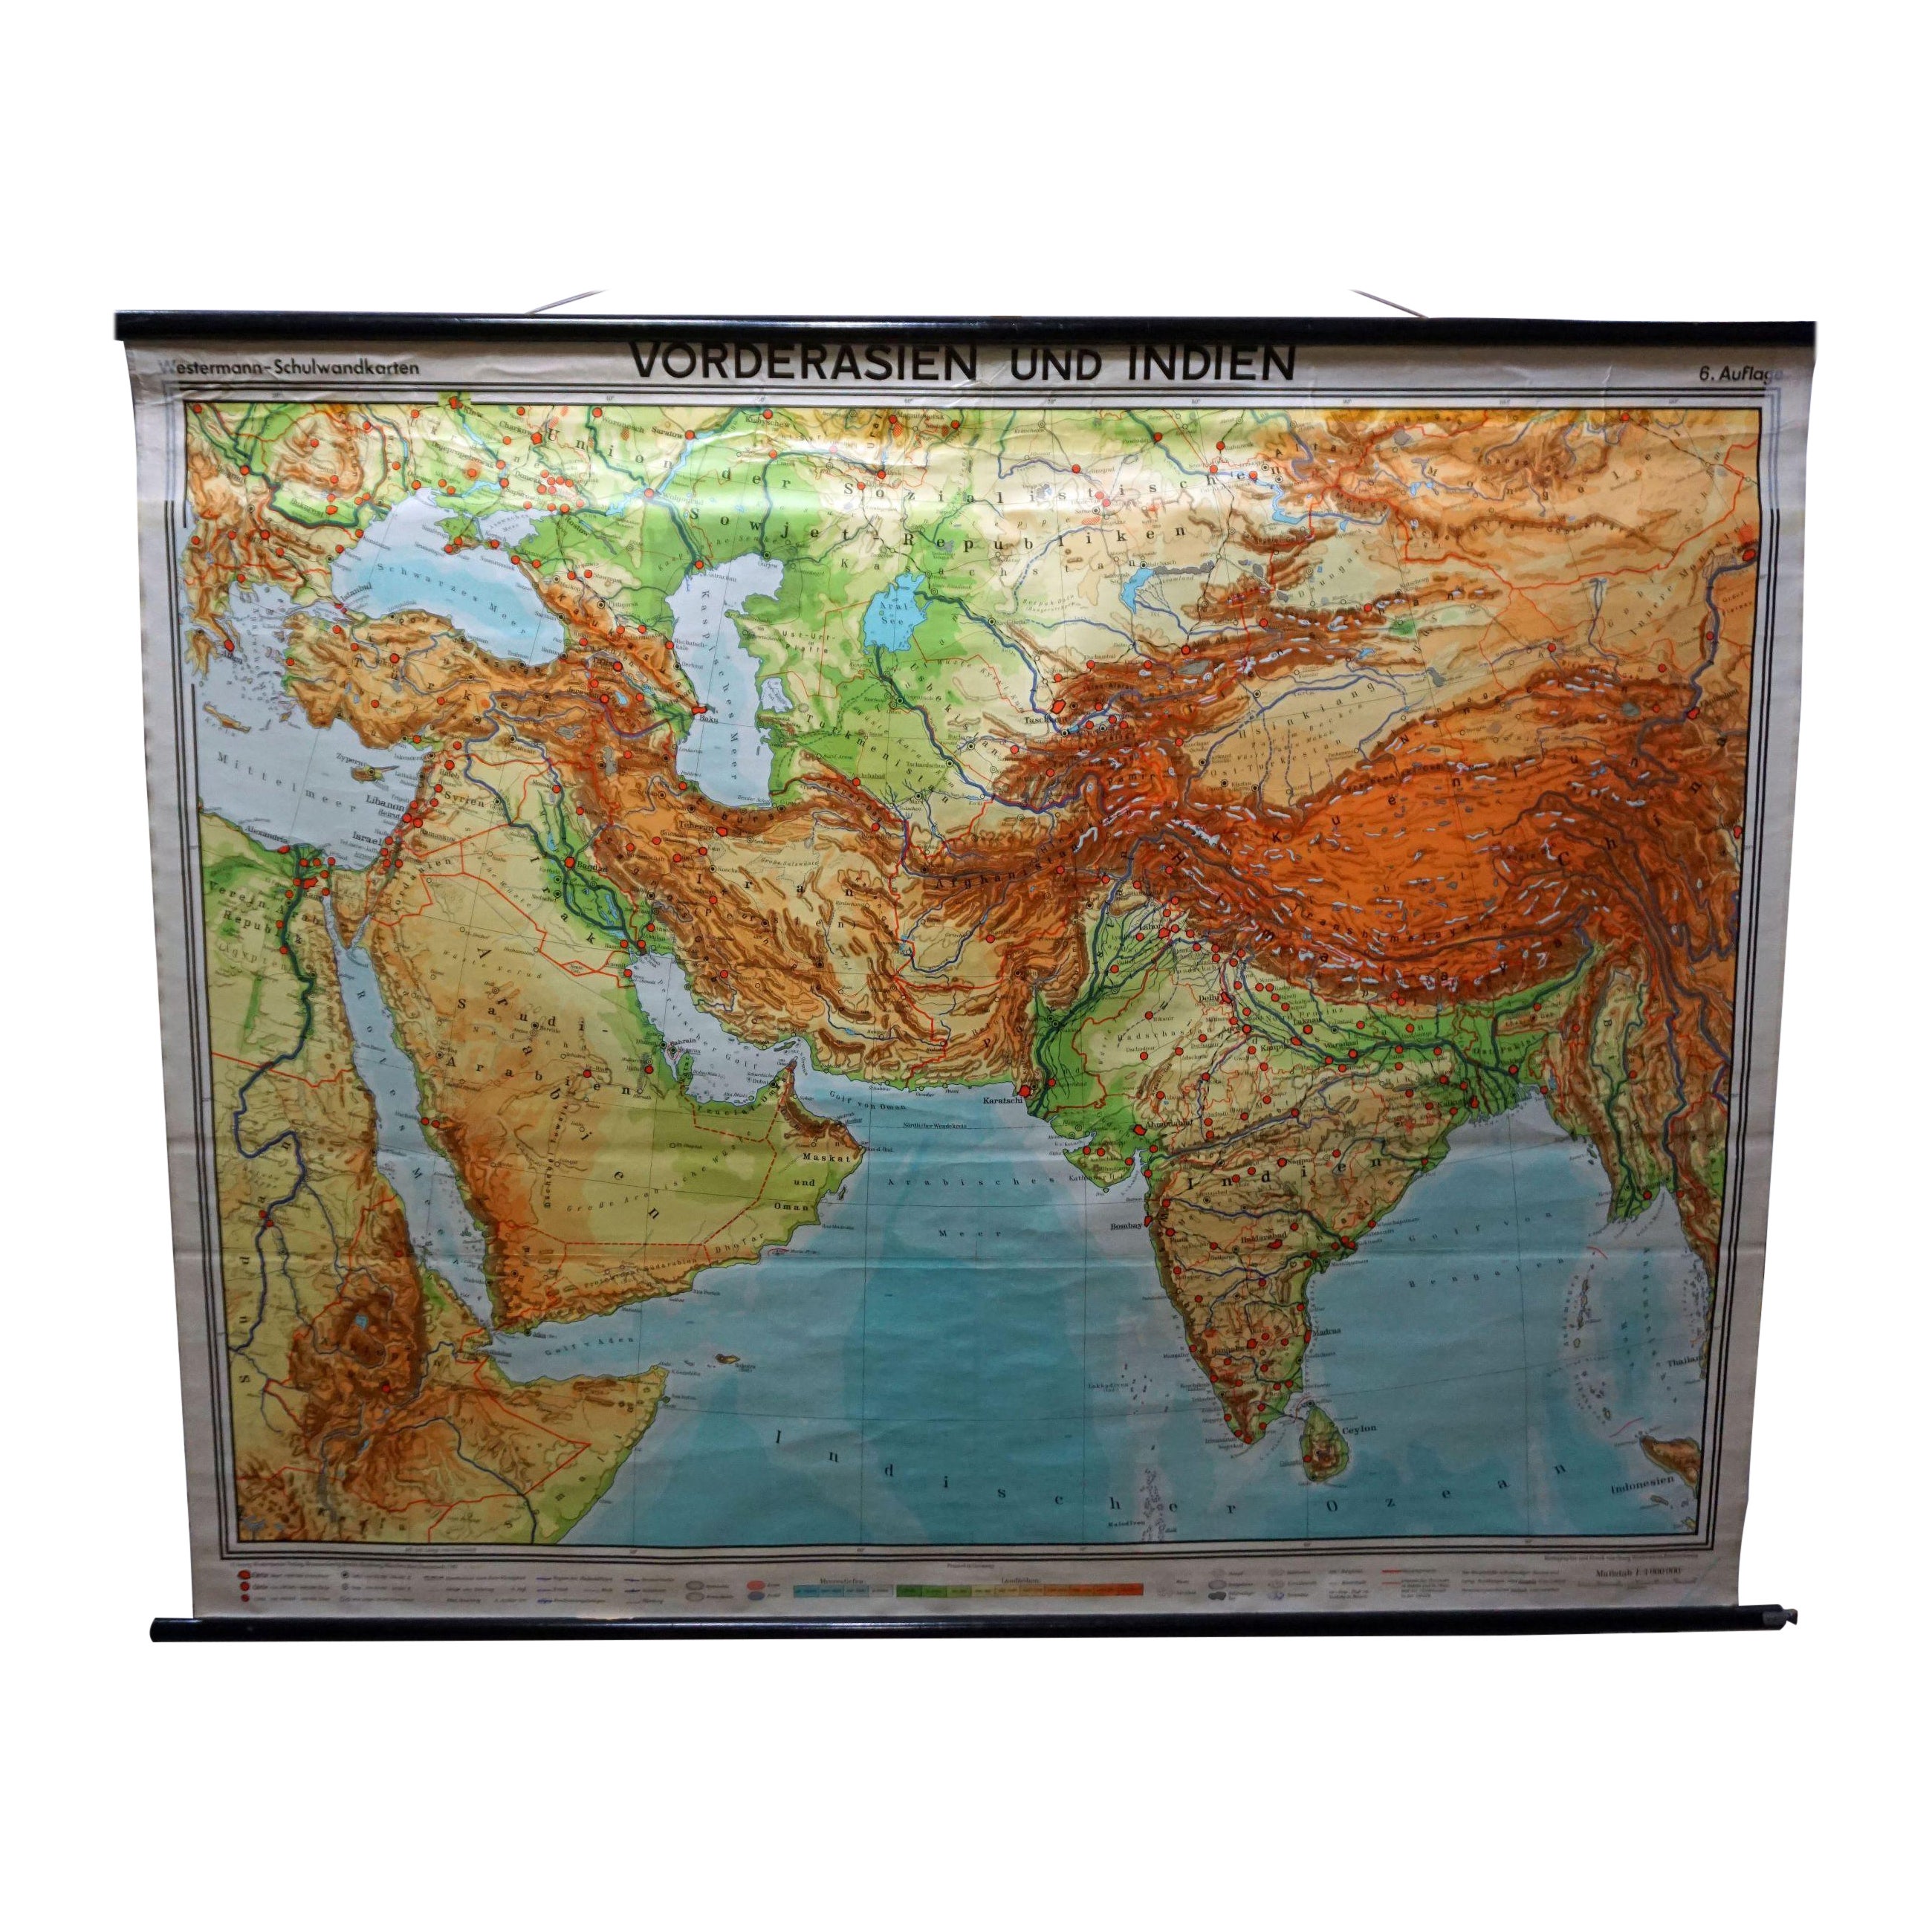 Middle East Saudia Arabia Israel India Map Rollable Mural Vintage Wall Chart For Sale